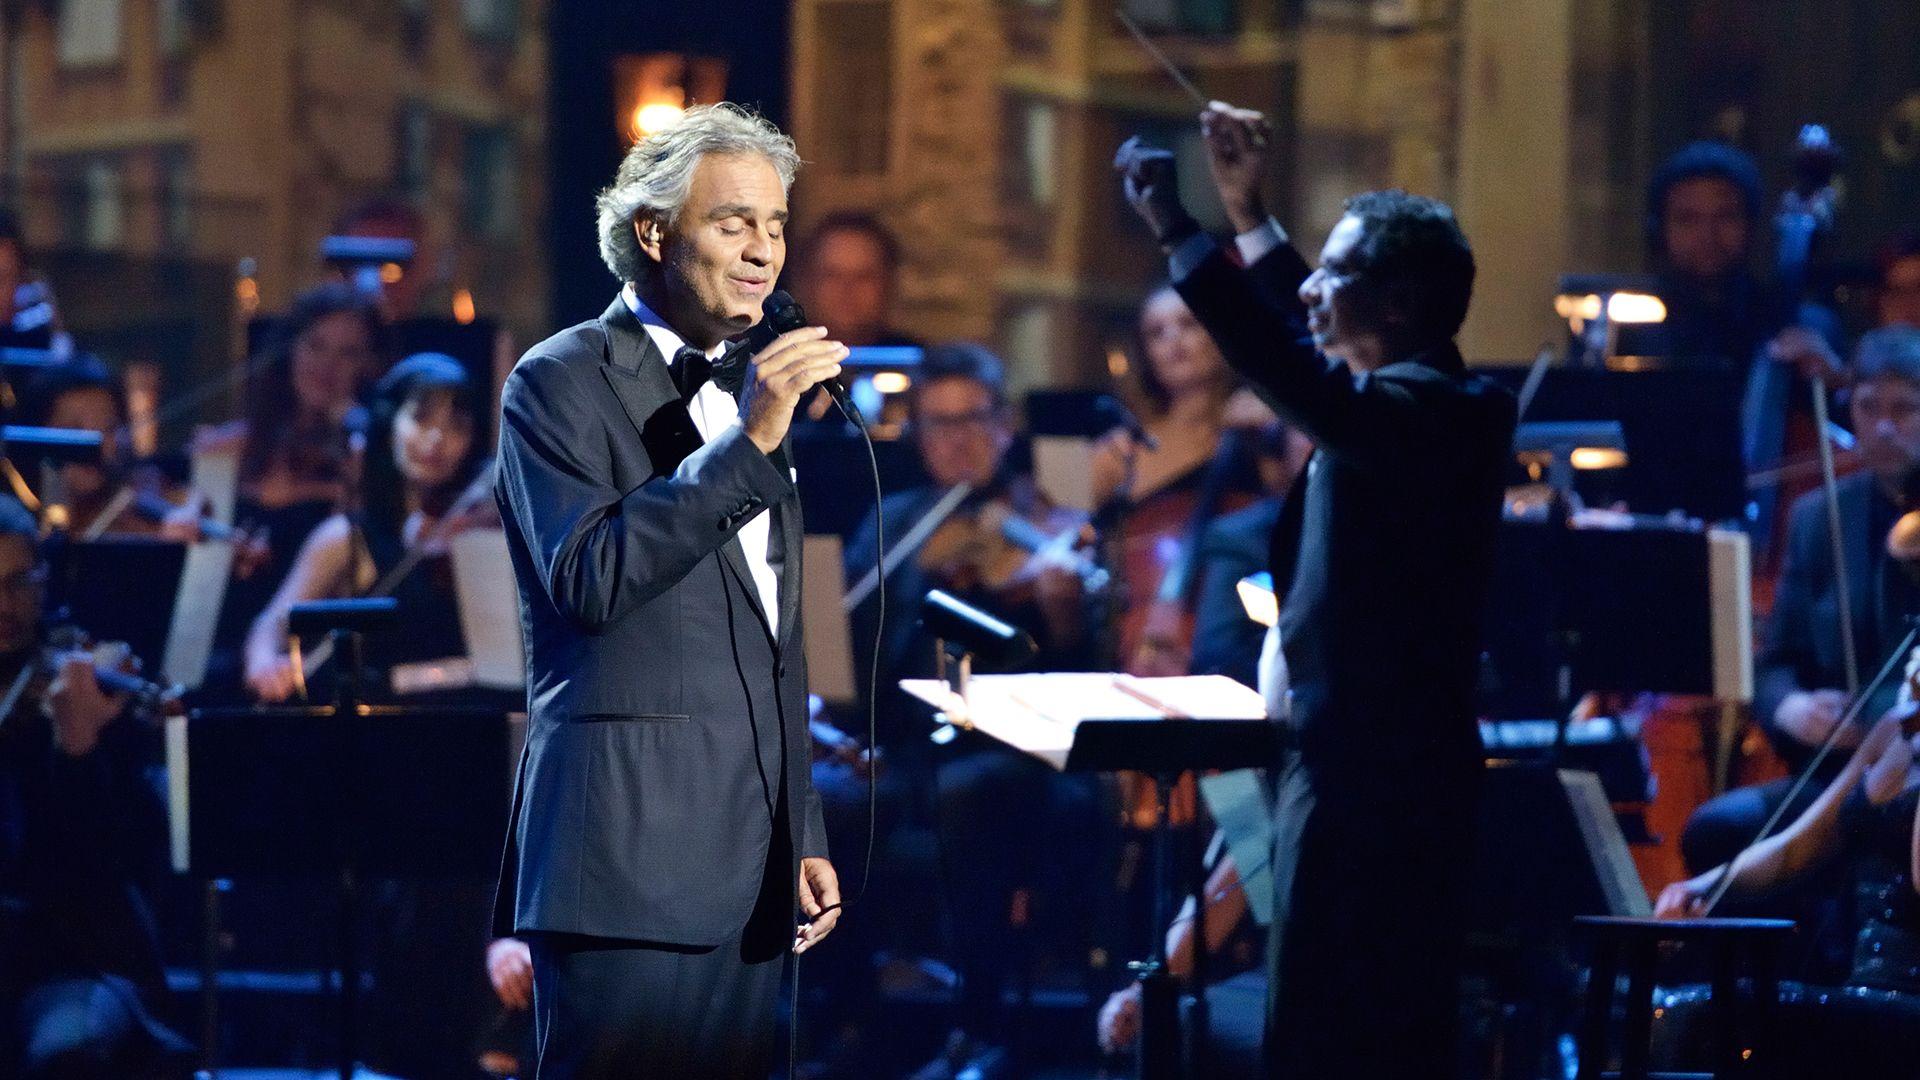 Andrea Bocelli: Cinema. About the Concert